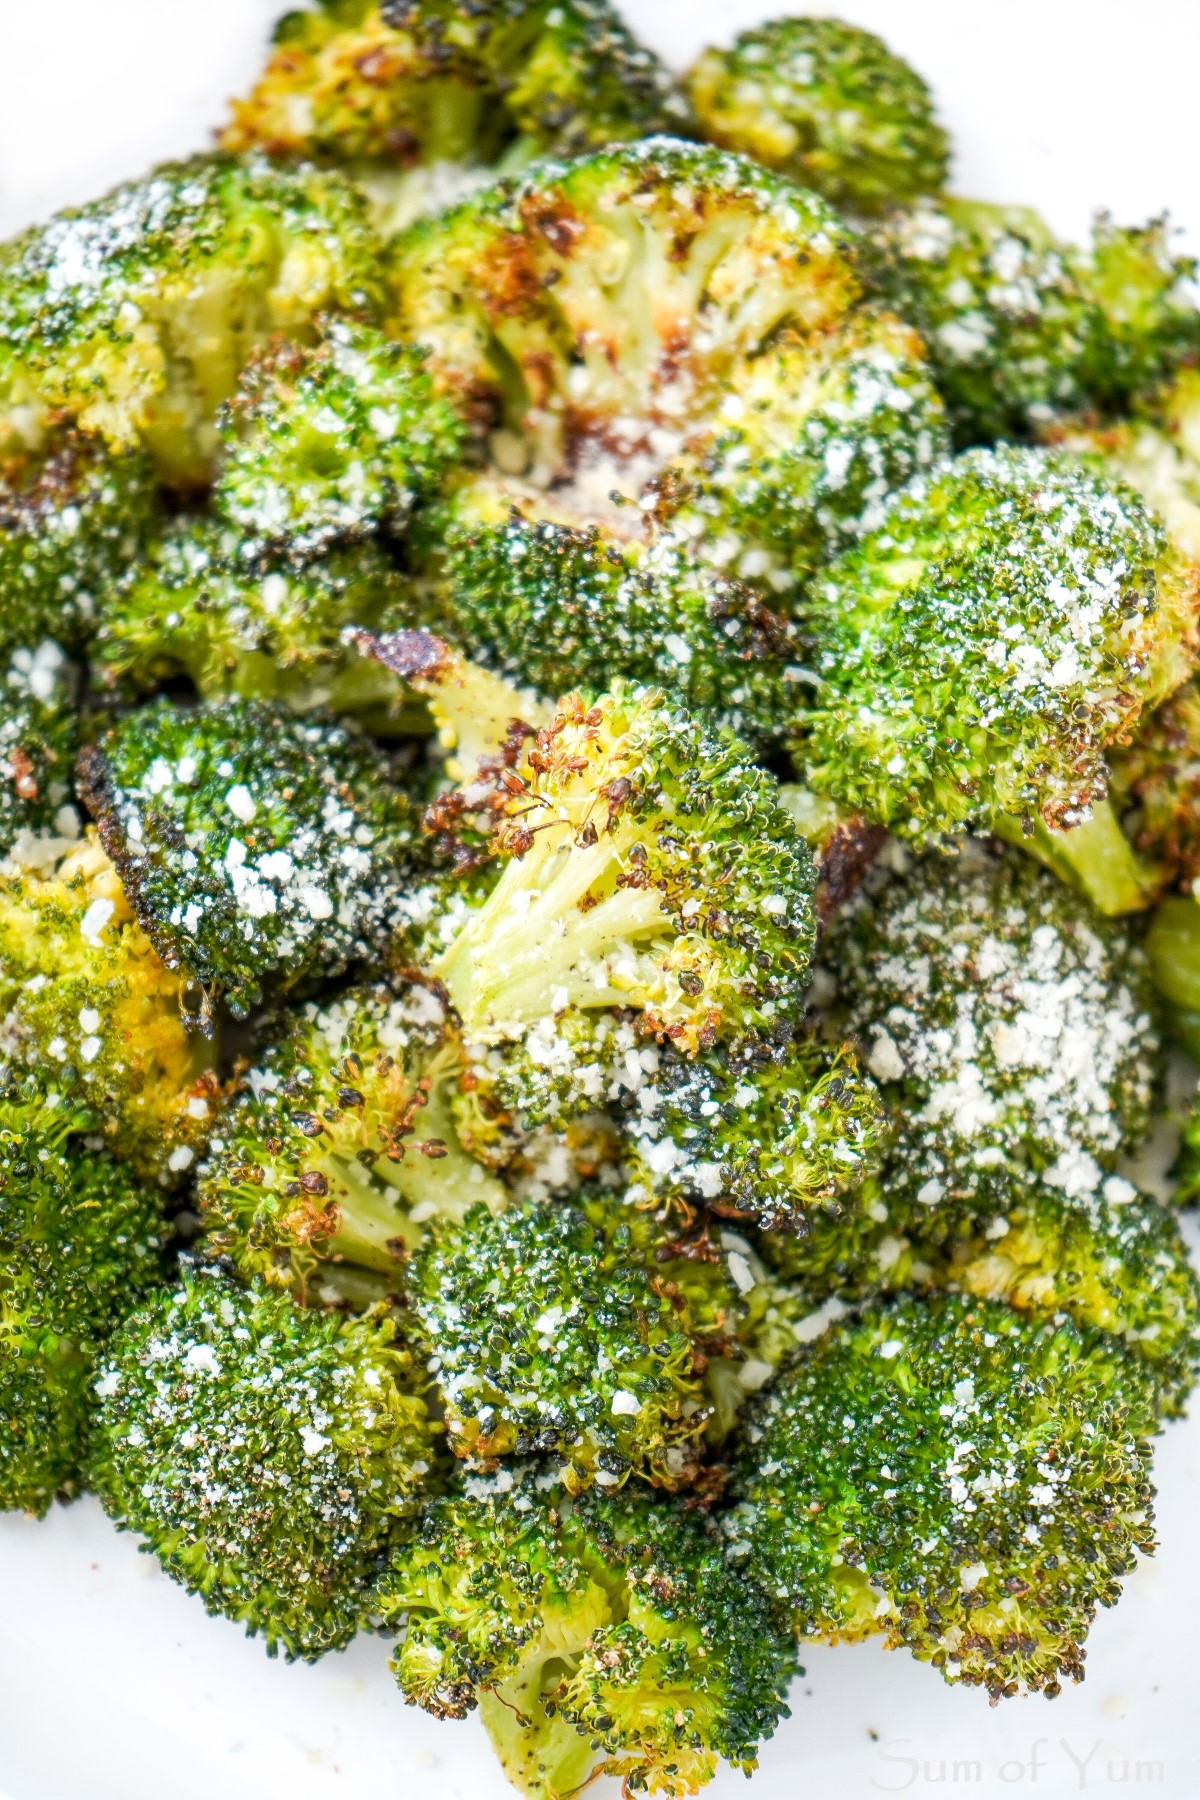 Roasted Broccoli with Parmesan Cheese, Garlic and Lemon